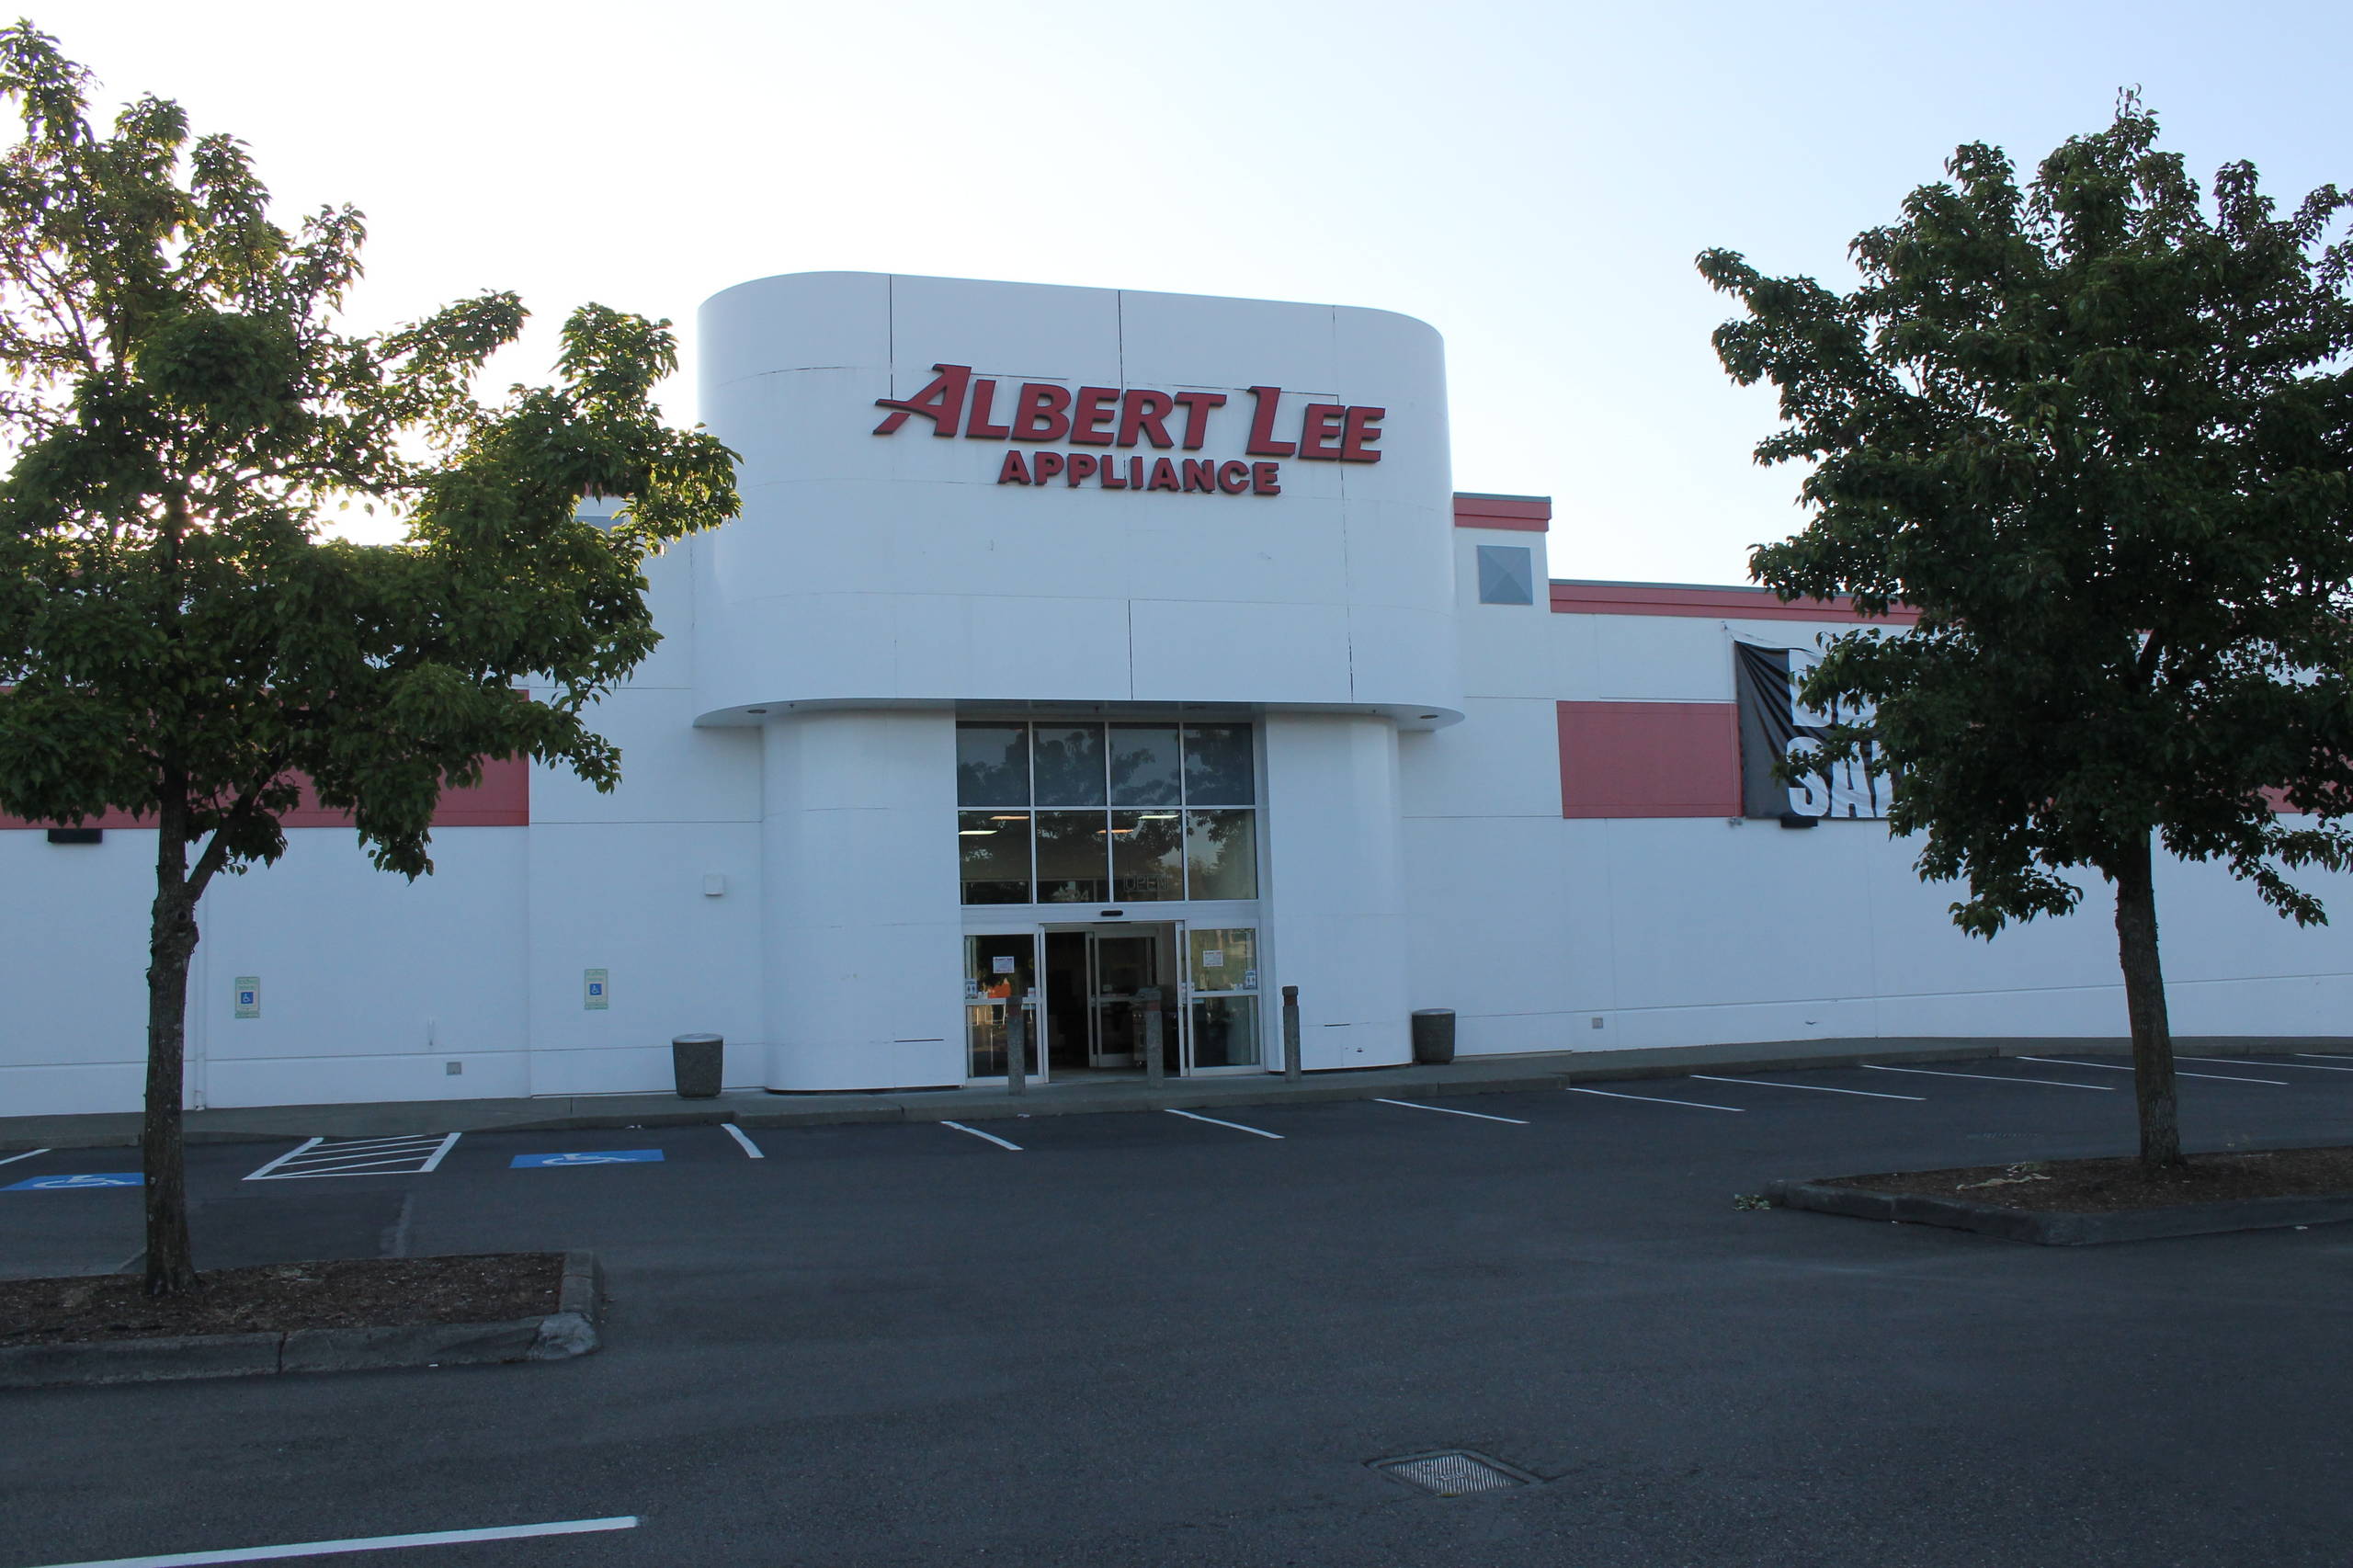 Appliance Stores Tacoma: Albert Lee Appliance Reviews | Albert Lee | Seattle,  Tacoma, Bellevue